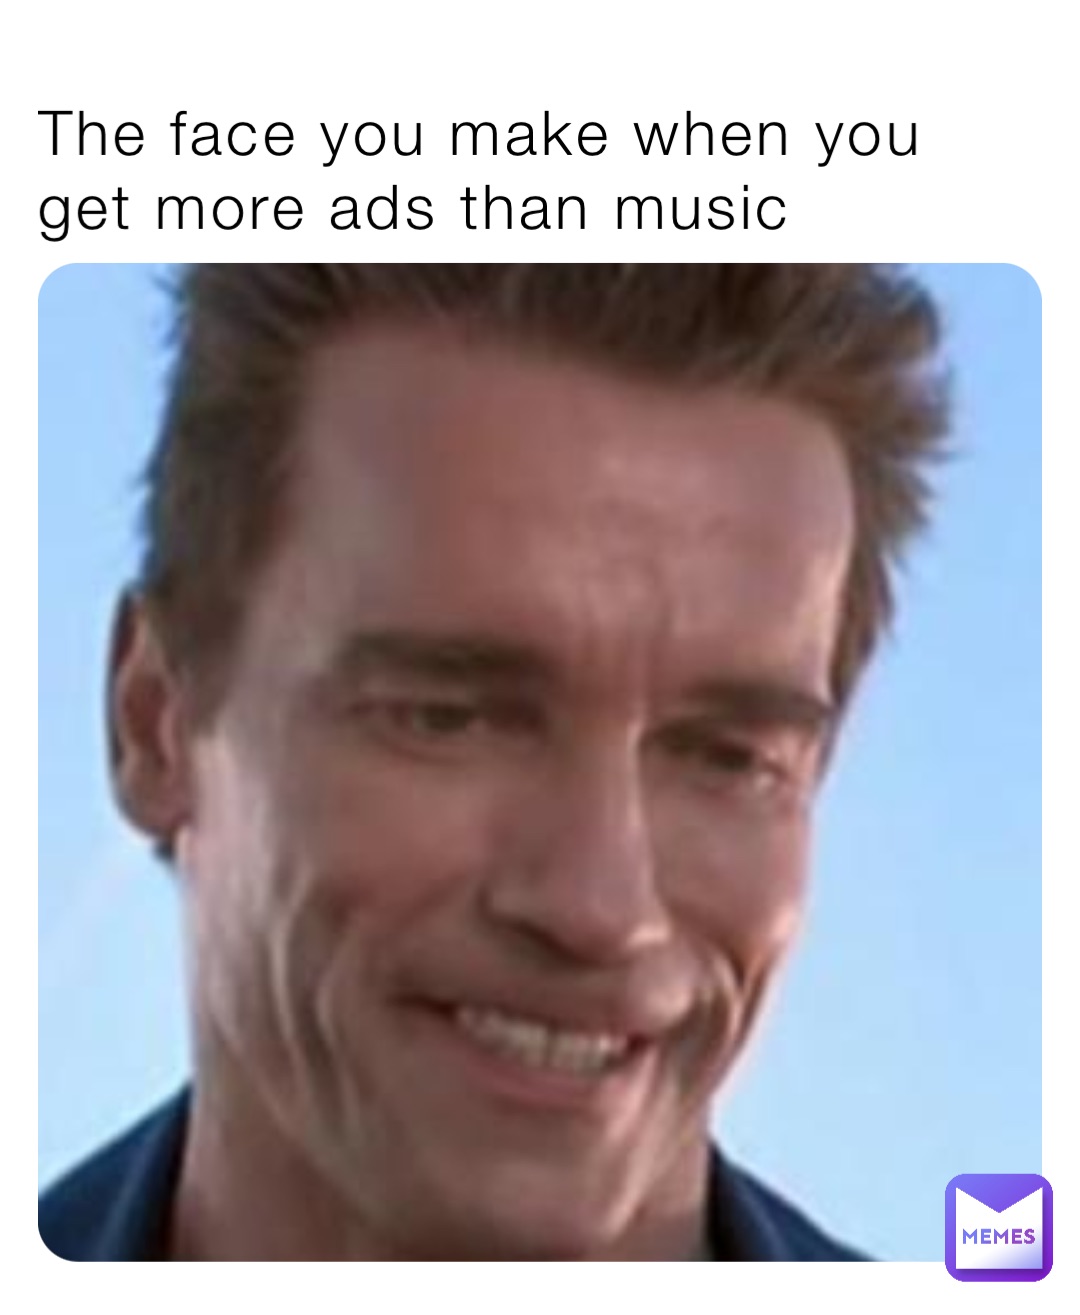 The face you make when you get more ads than music